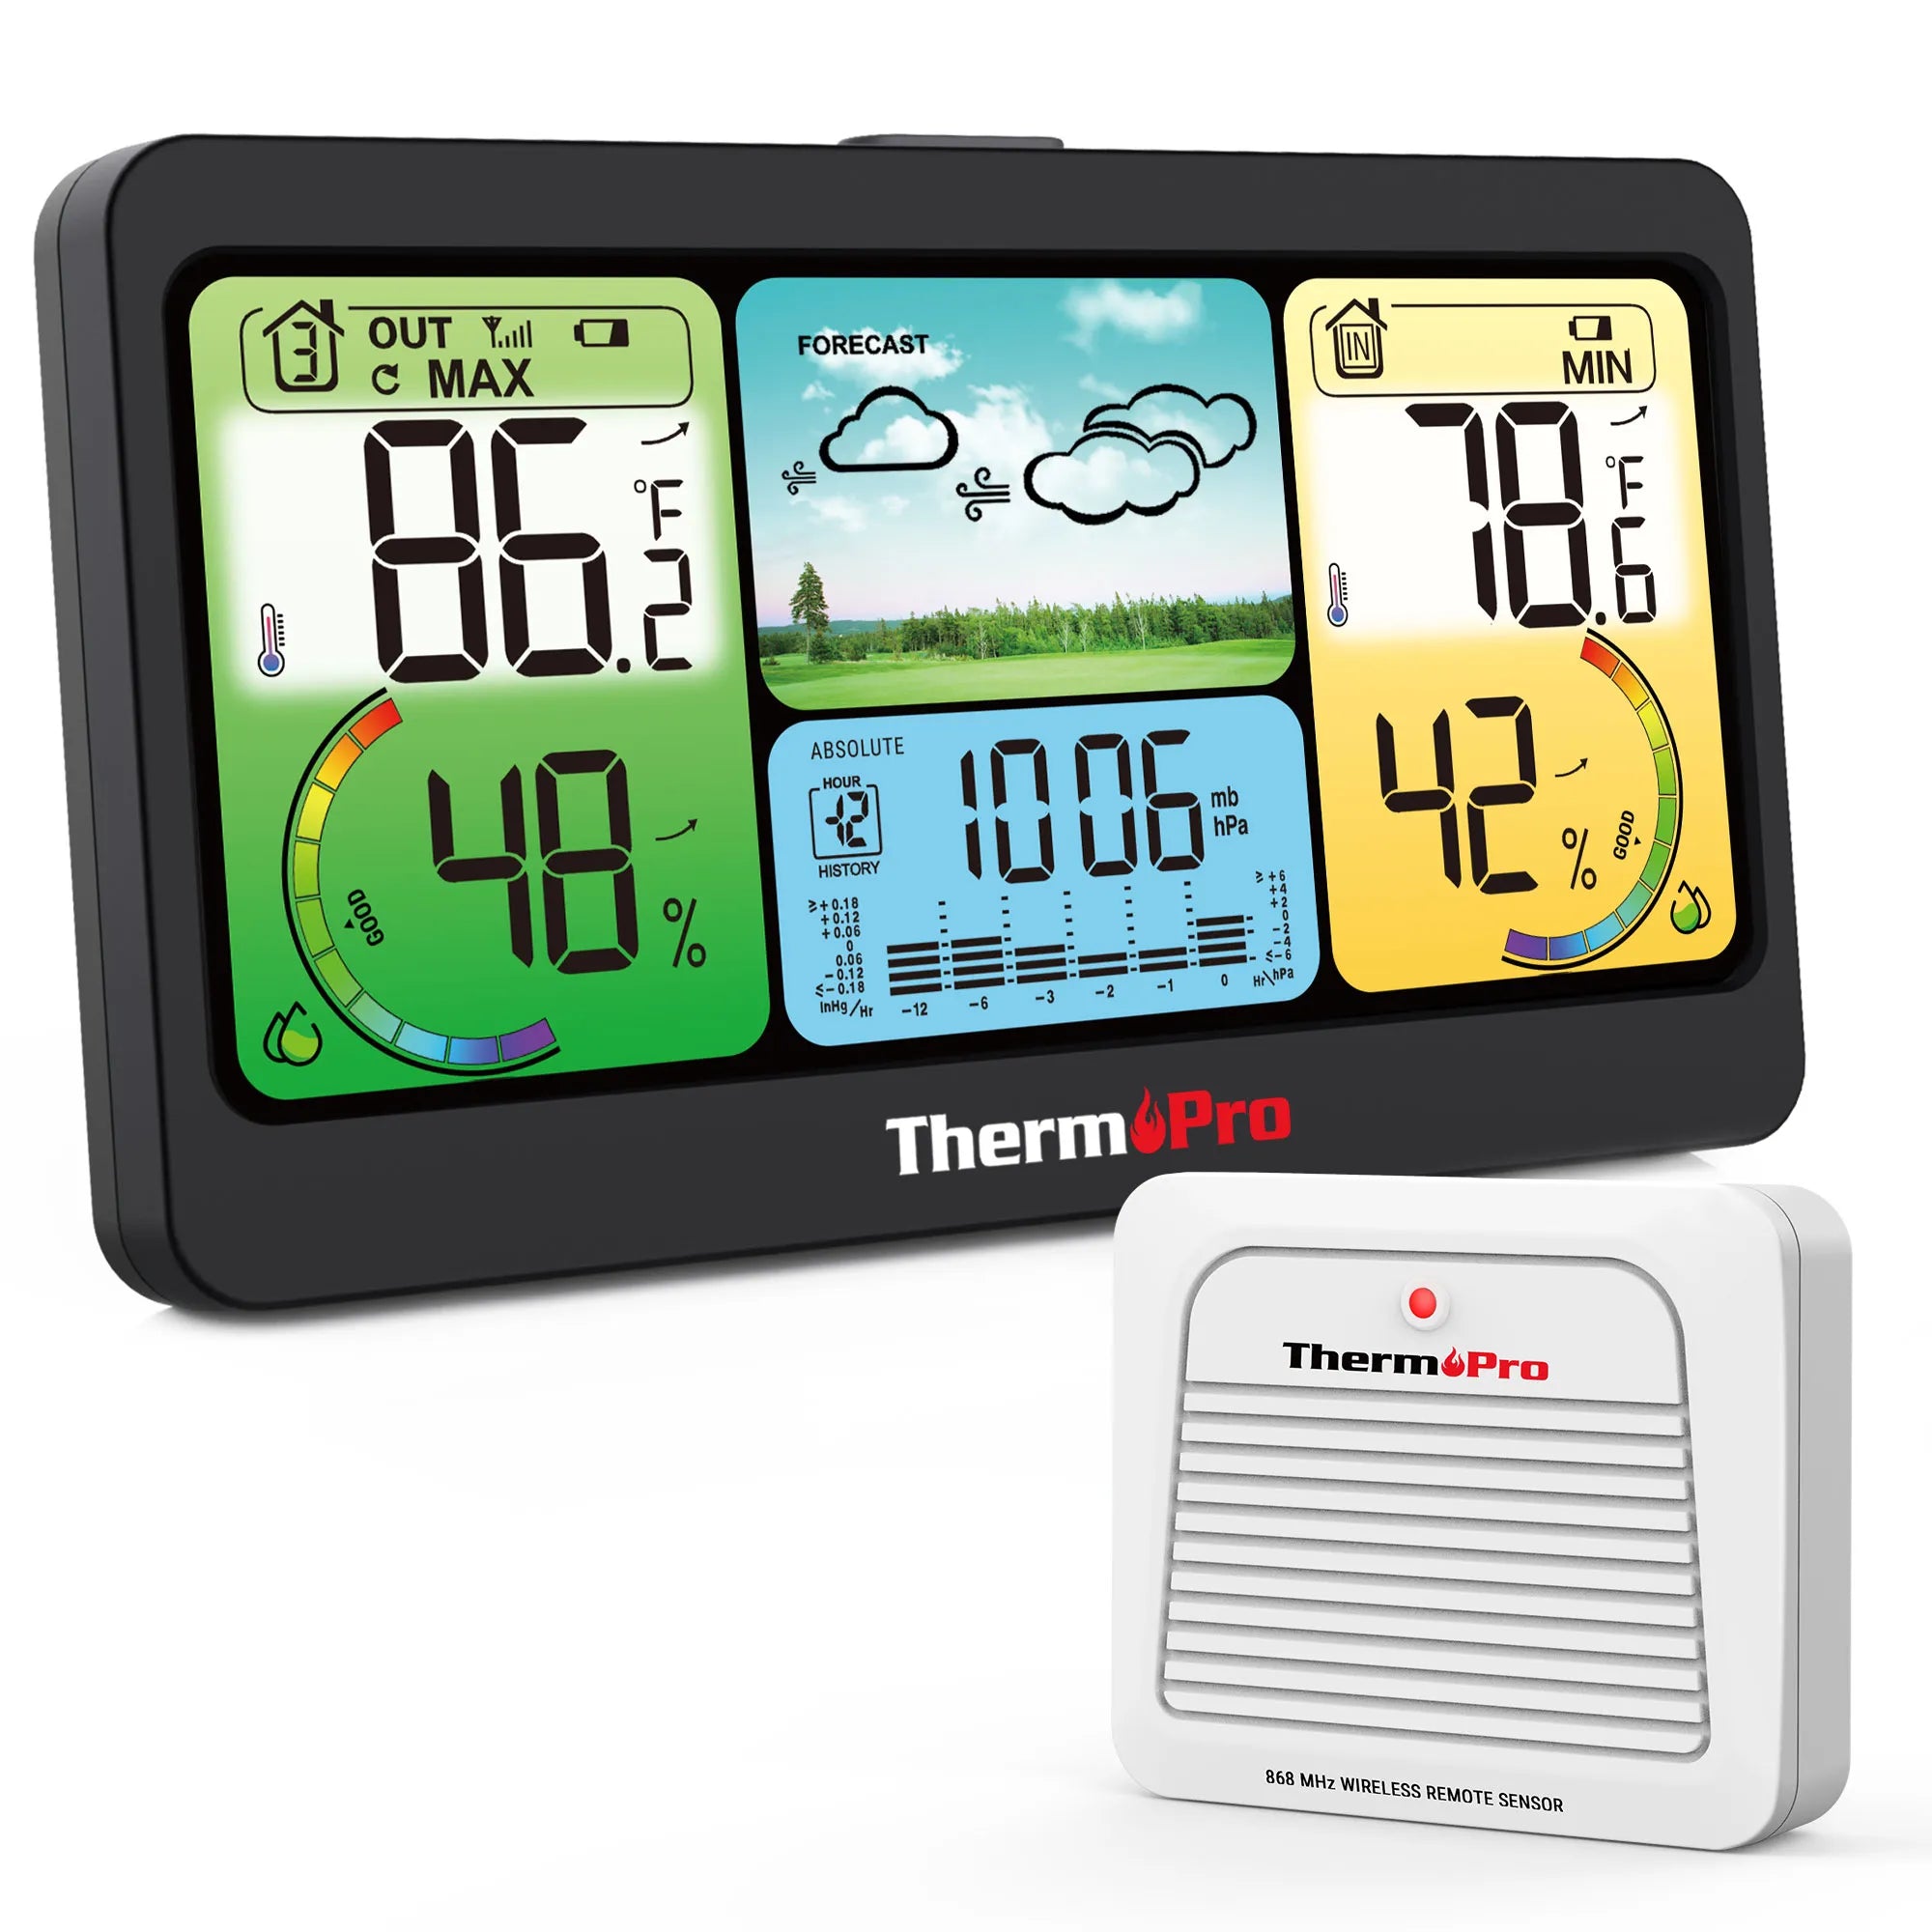 ThermoPro TP280C Wireless 300M Remote Range Chargable Large Display Outdoor And Indoor Thermometer Hygrometer